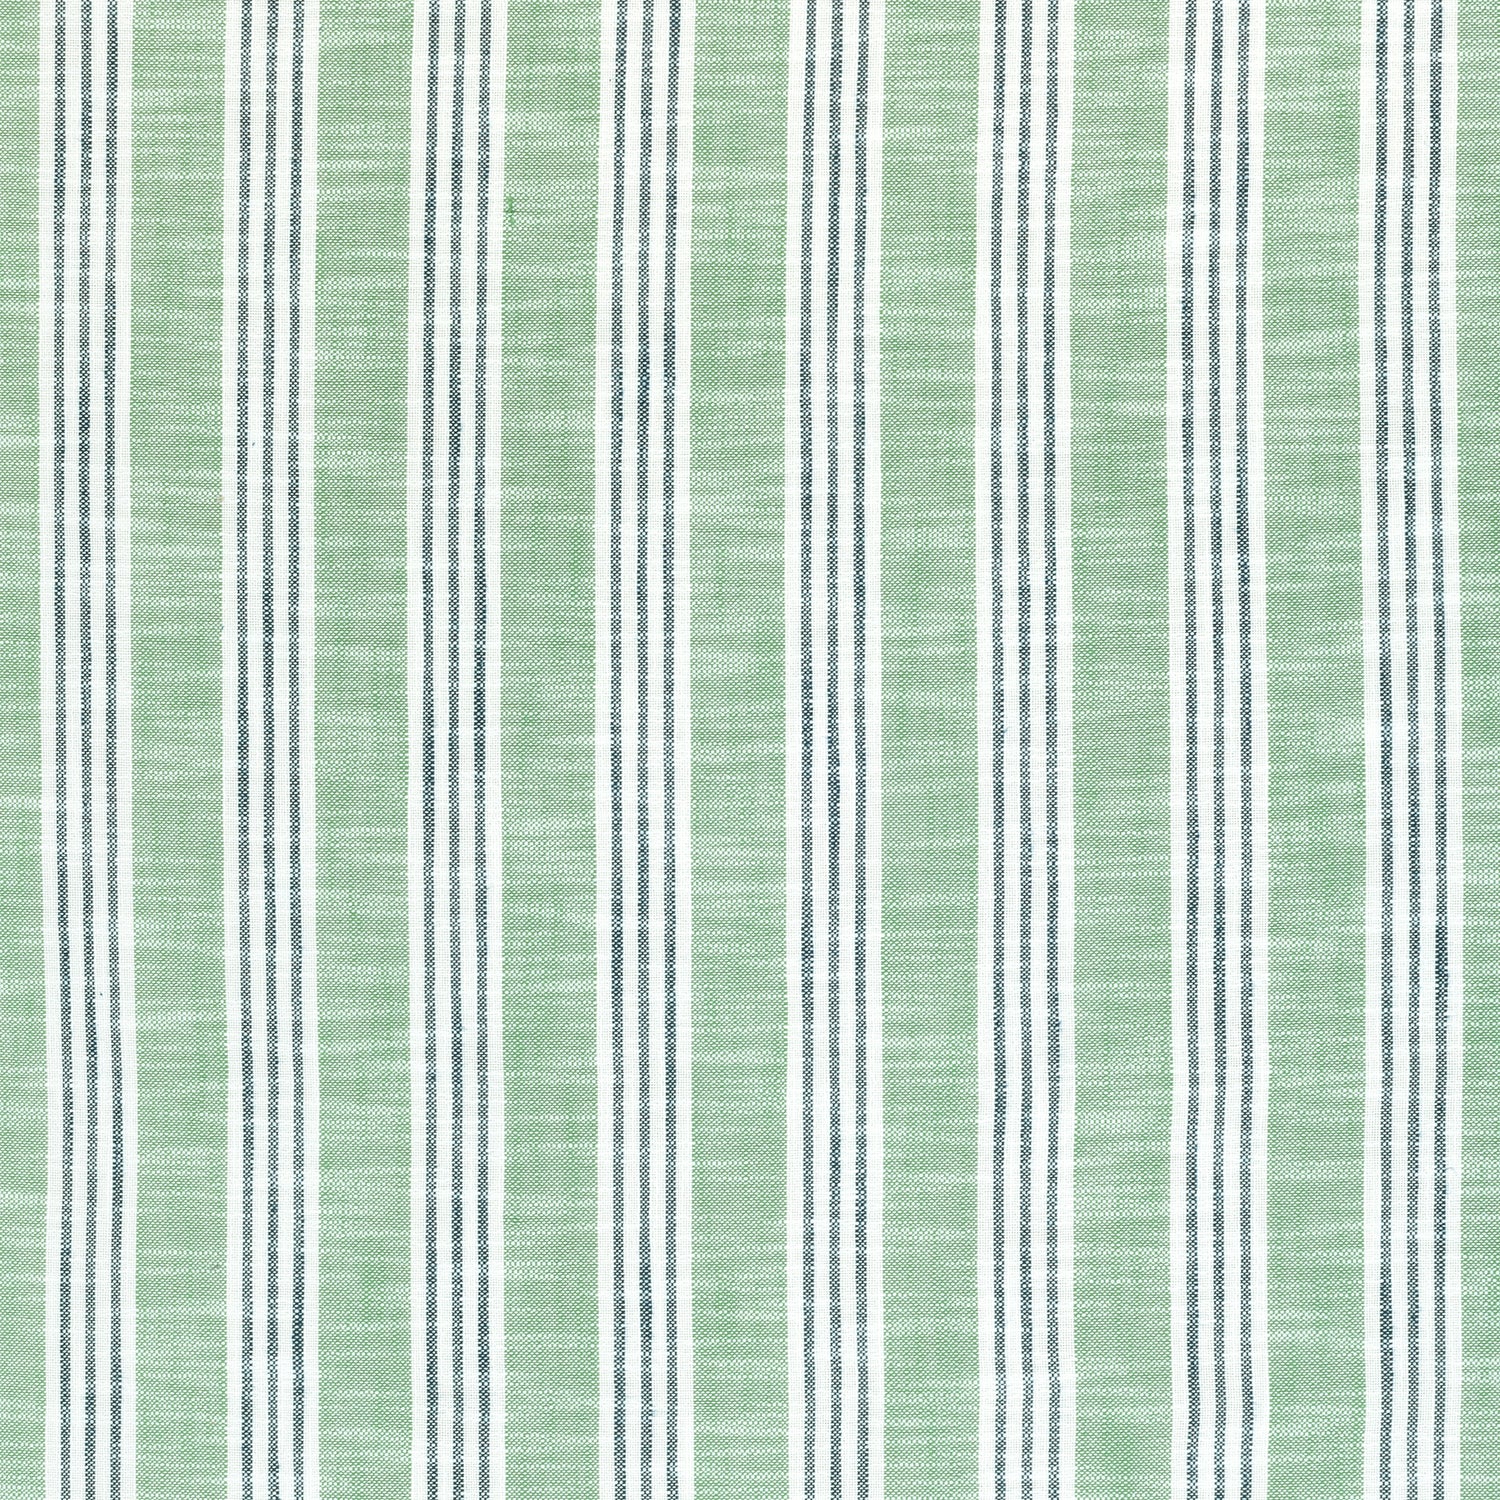 Southport Stripe fabric in kelly green and navy color - pattern number W73487 - by Thibaut in the Landmark collection